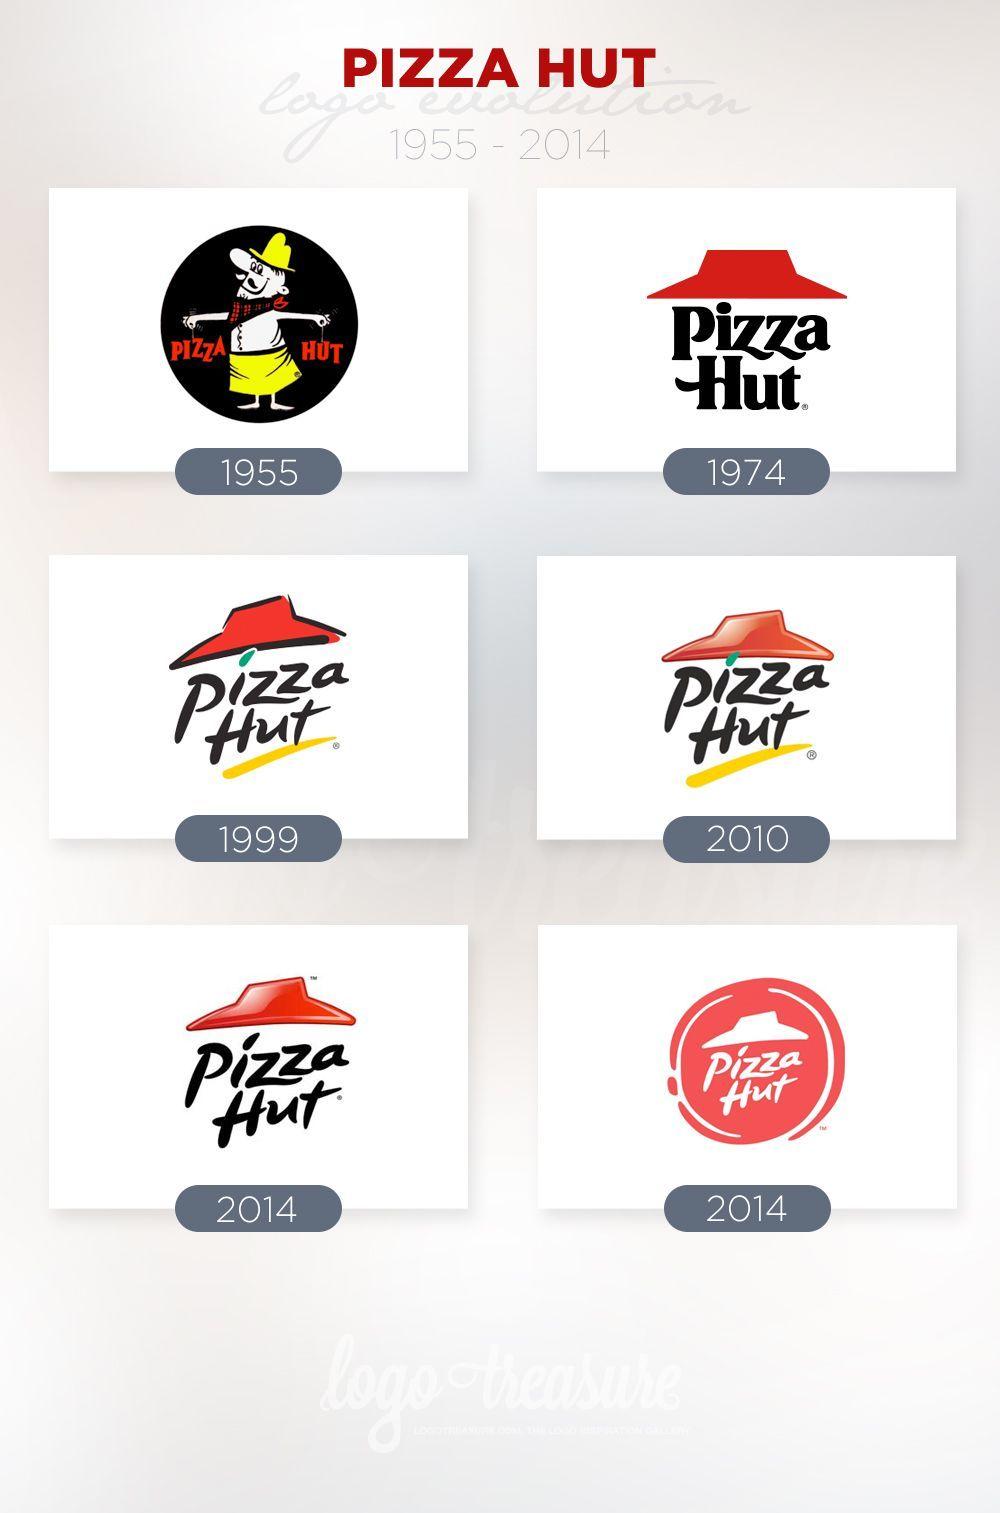 Pizza Hut Old Logo - Pizza Hut Logo Evolution from 1955 to 2014 | Branding and Identity ...